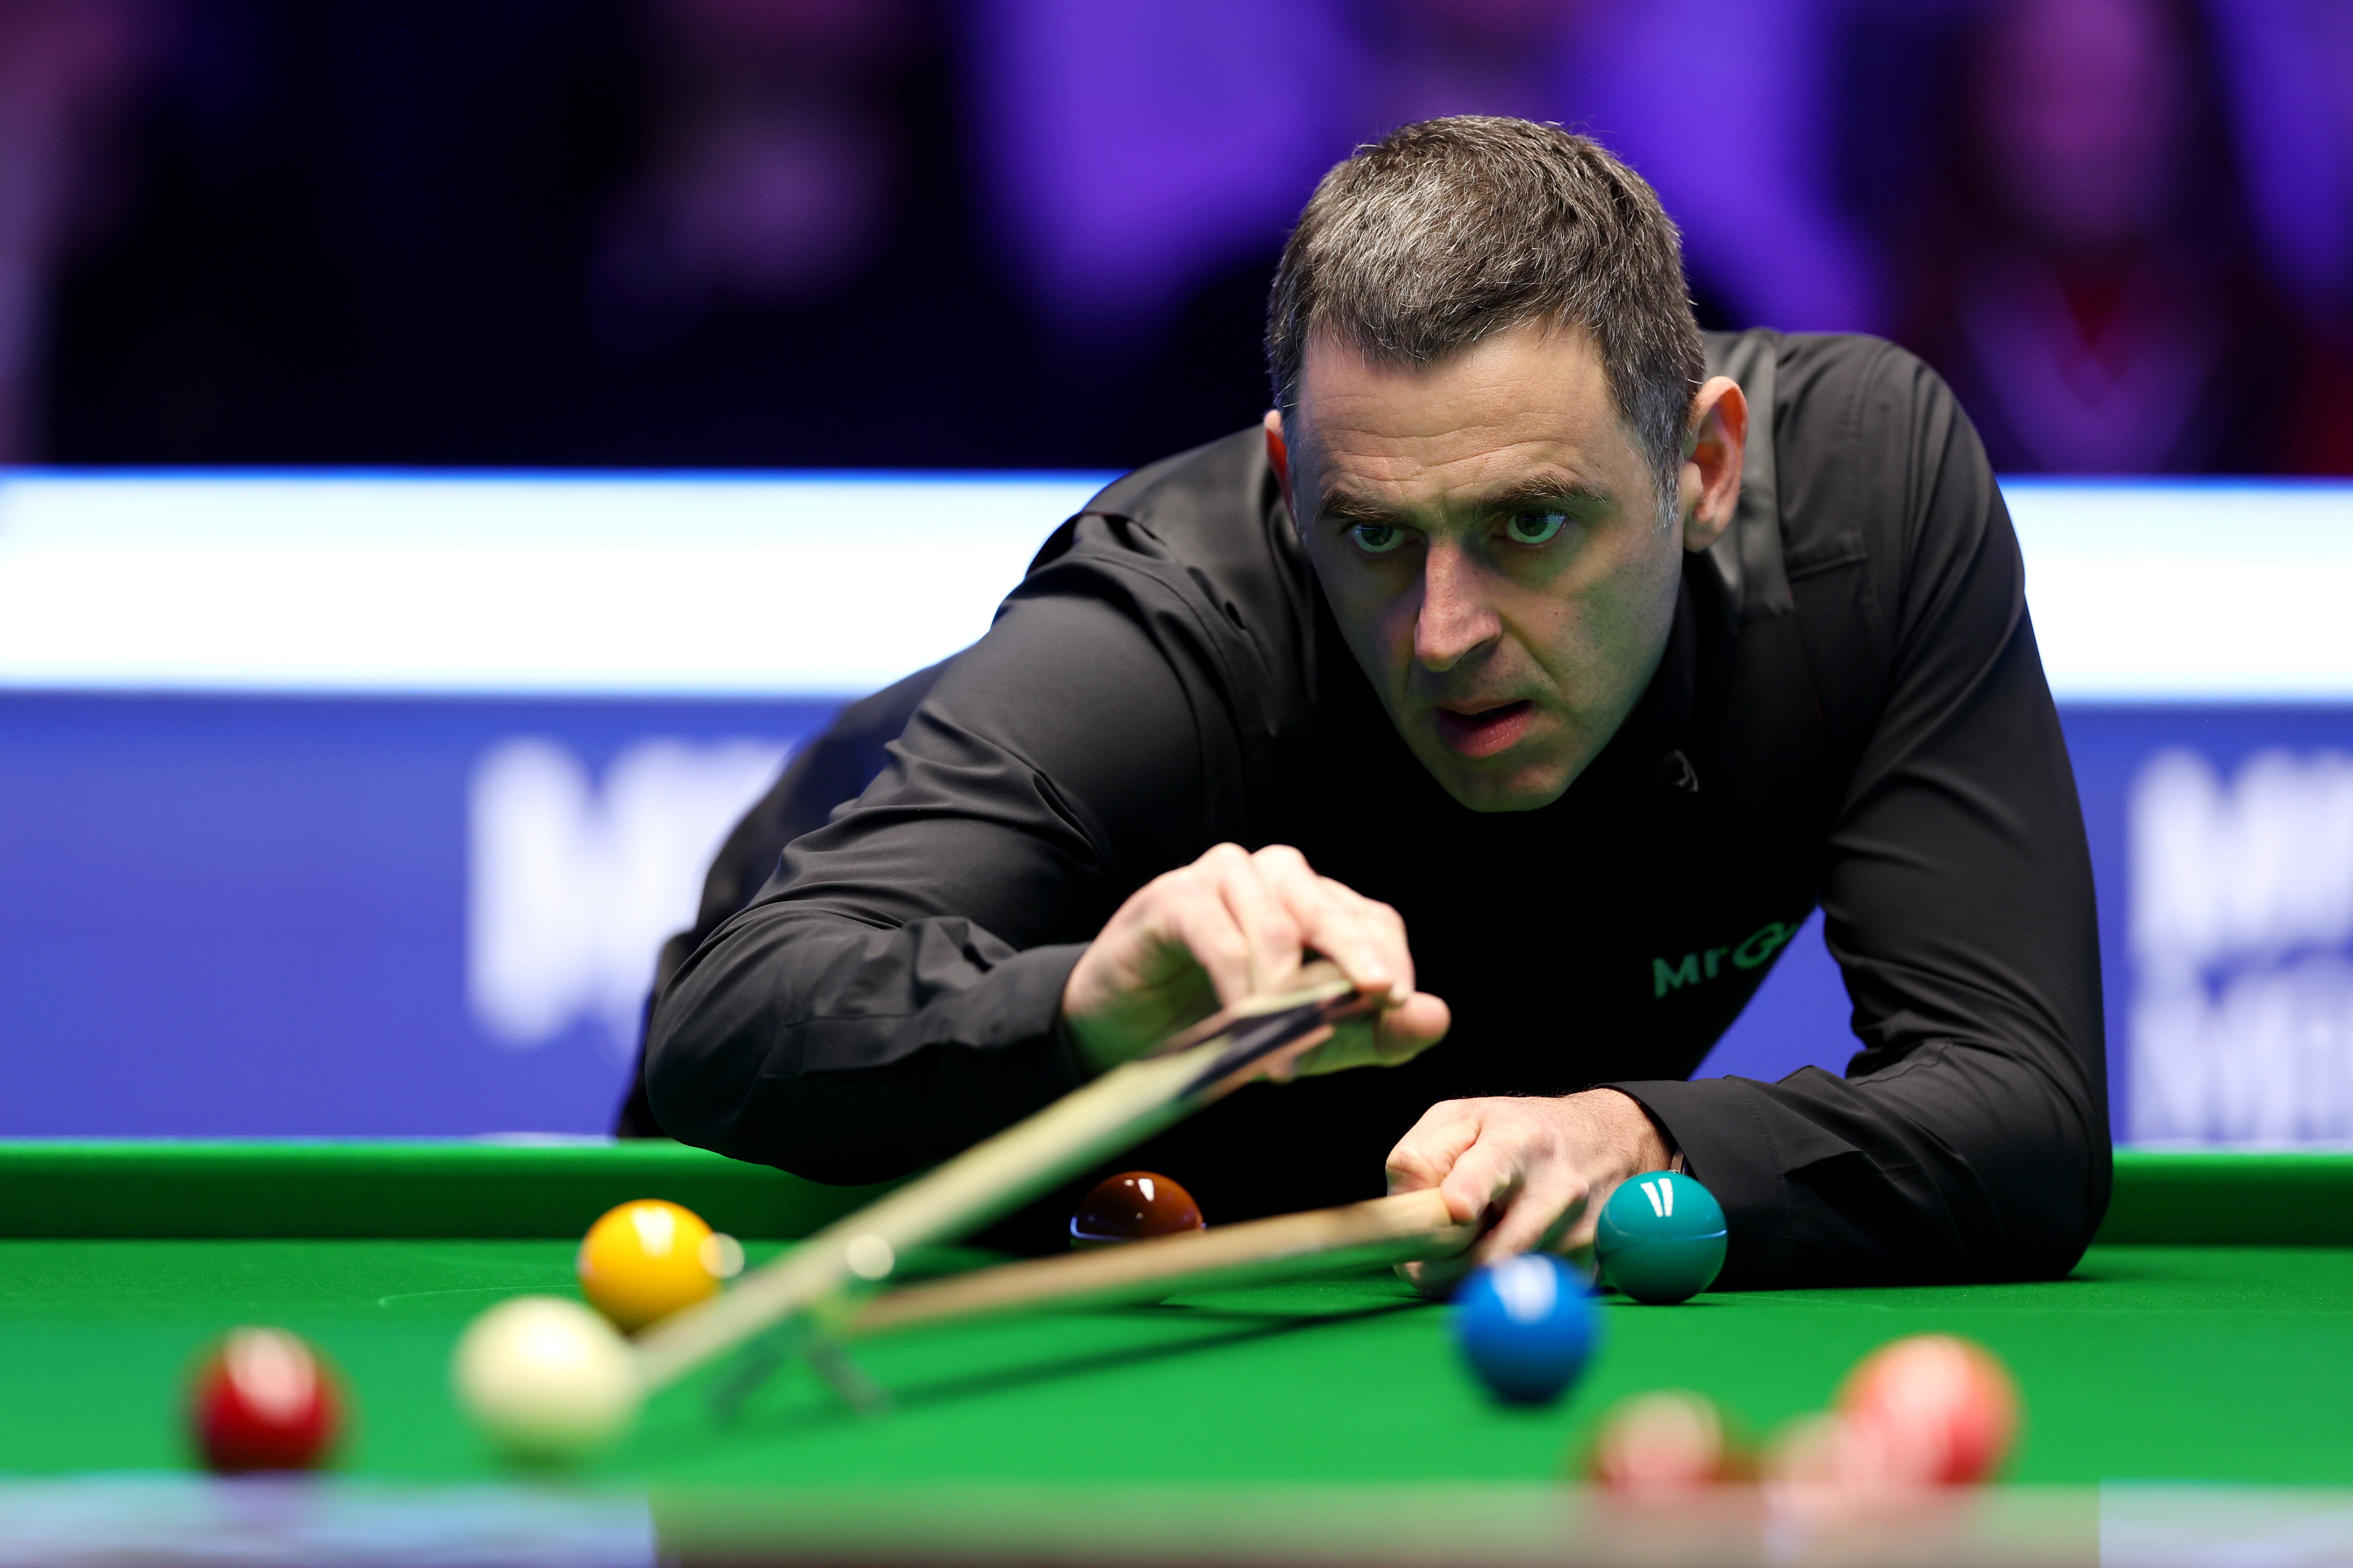 O’Sullivan made the comments after his win against Barry Hawkins on Thursday